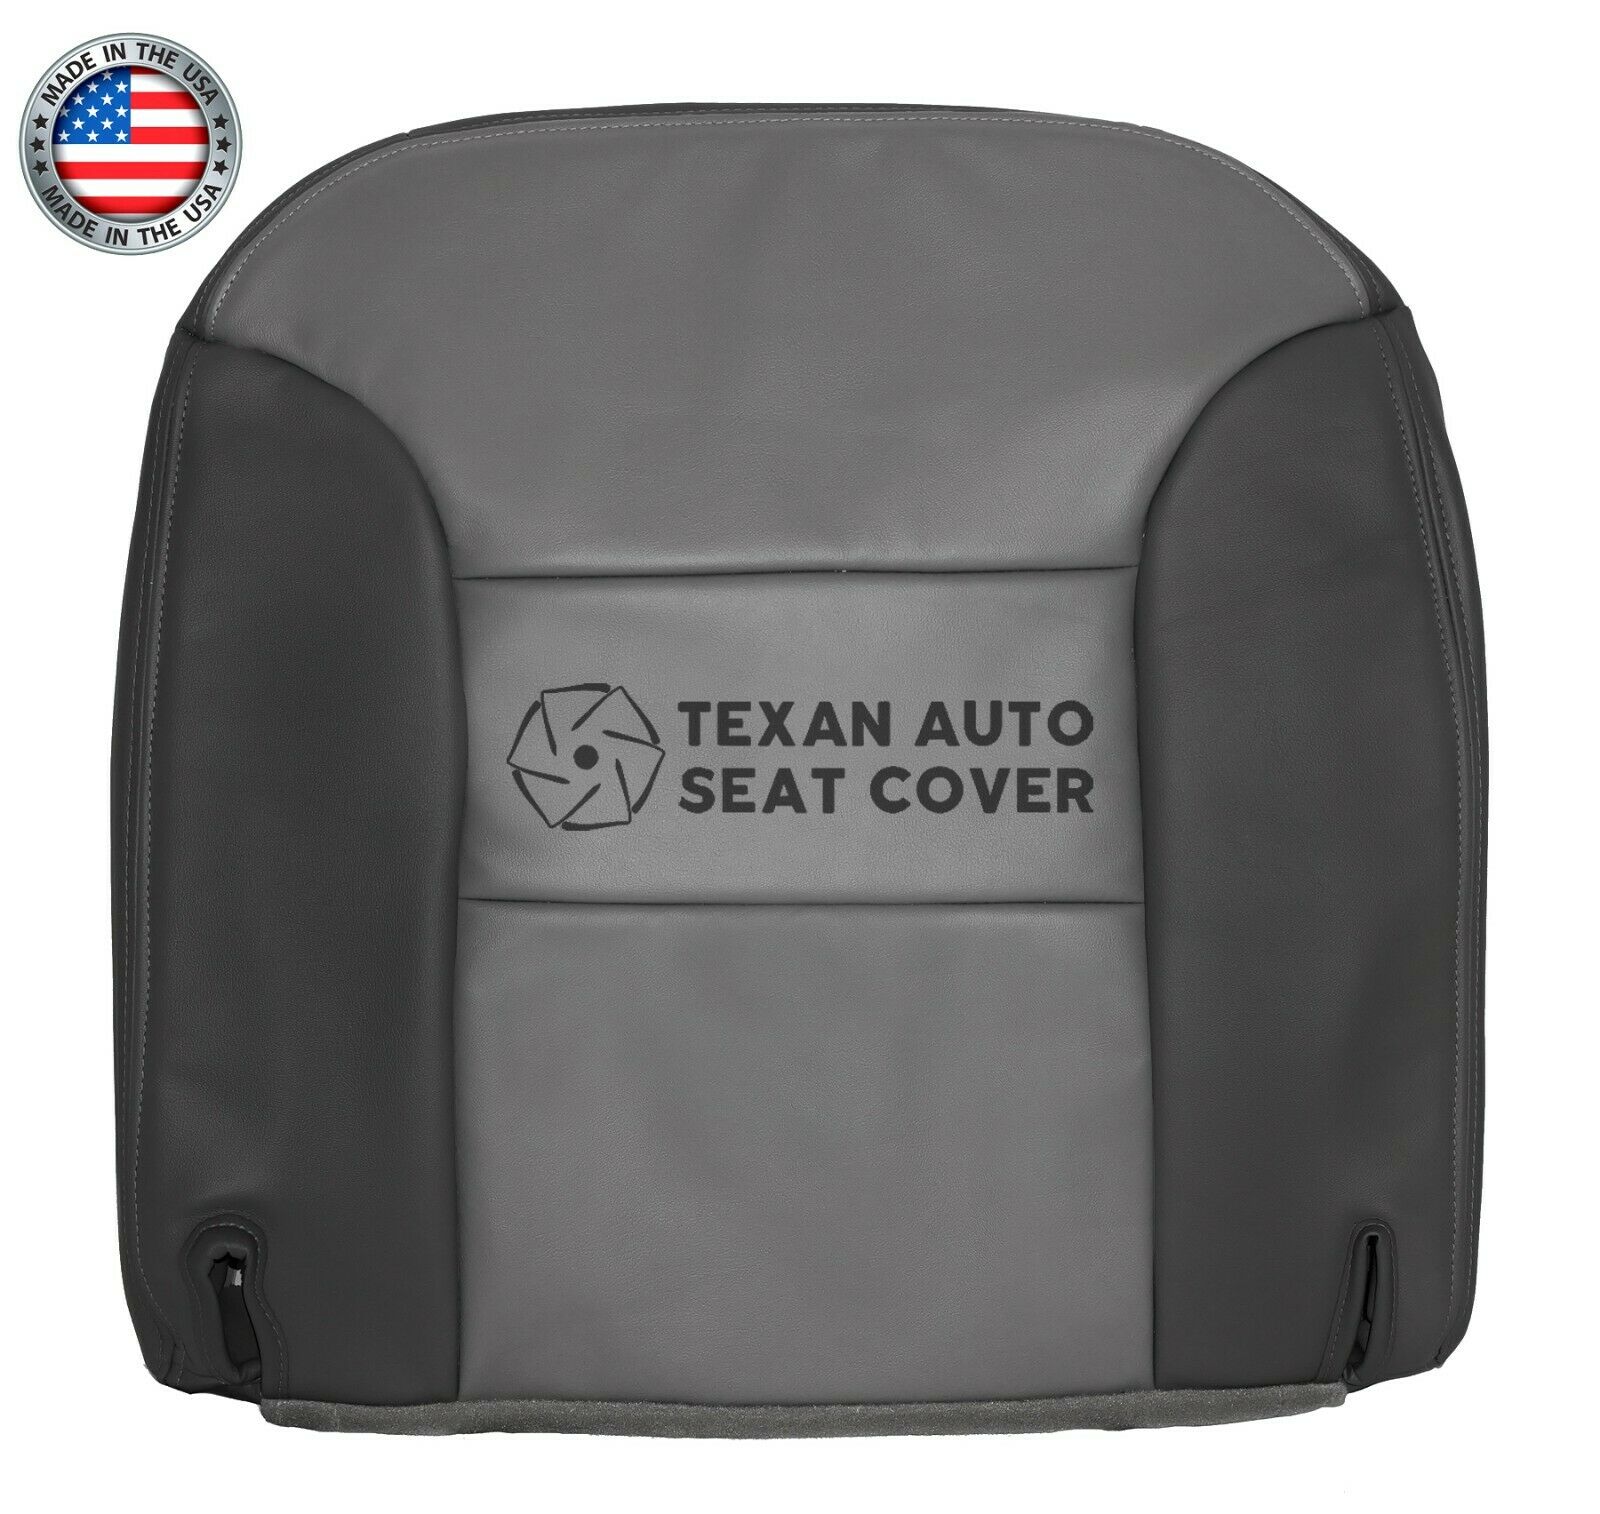 1999 & 2000 Chevy Tahoe Limited, Z71  Passenger Side Bottom Vinyl Replacement Seat Cover 2 Tone Gray